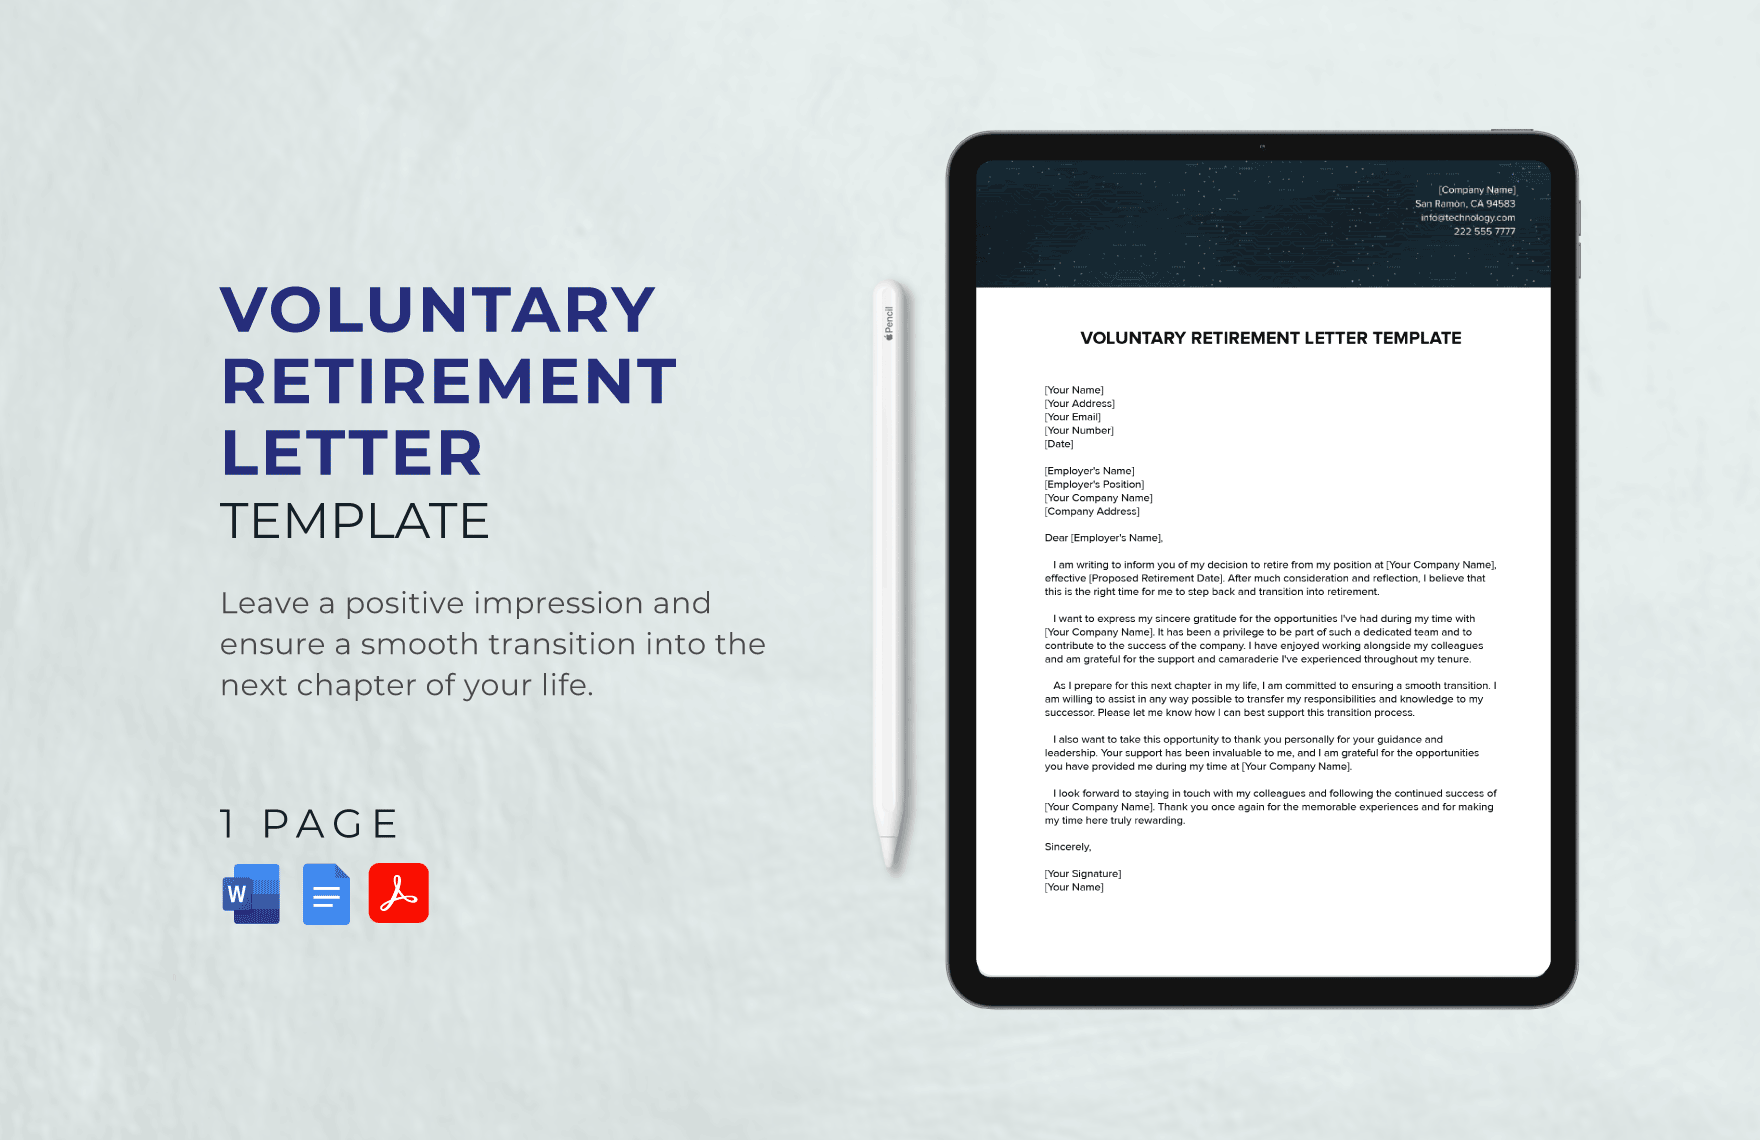 Free Voluntary Retirement Letter Template in Word, Google Docs, PDF